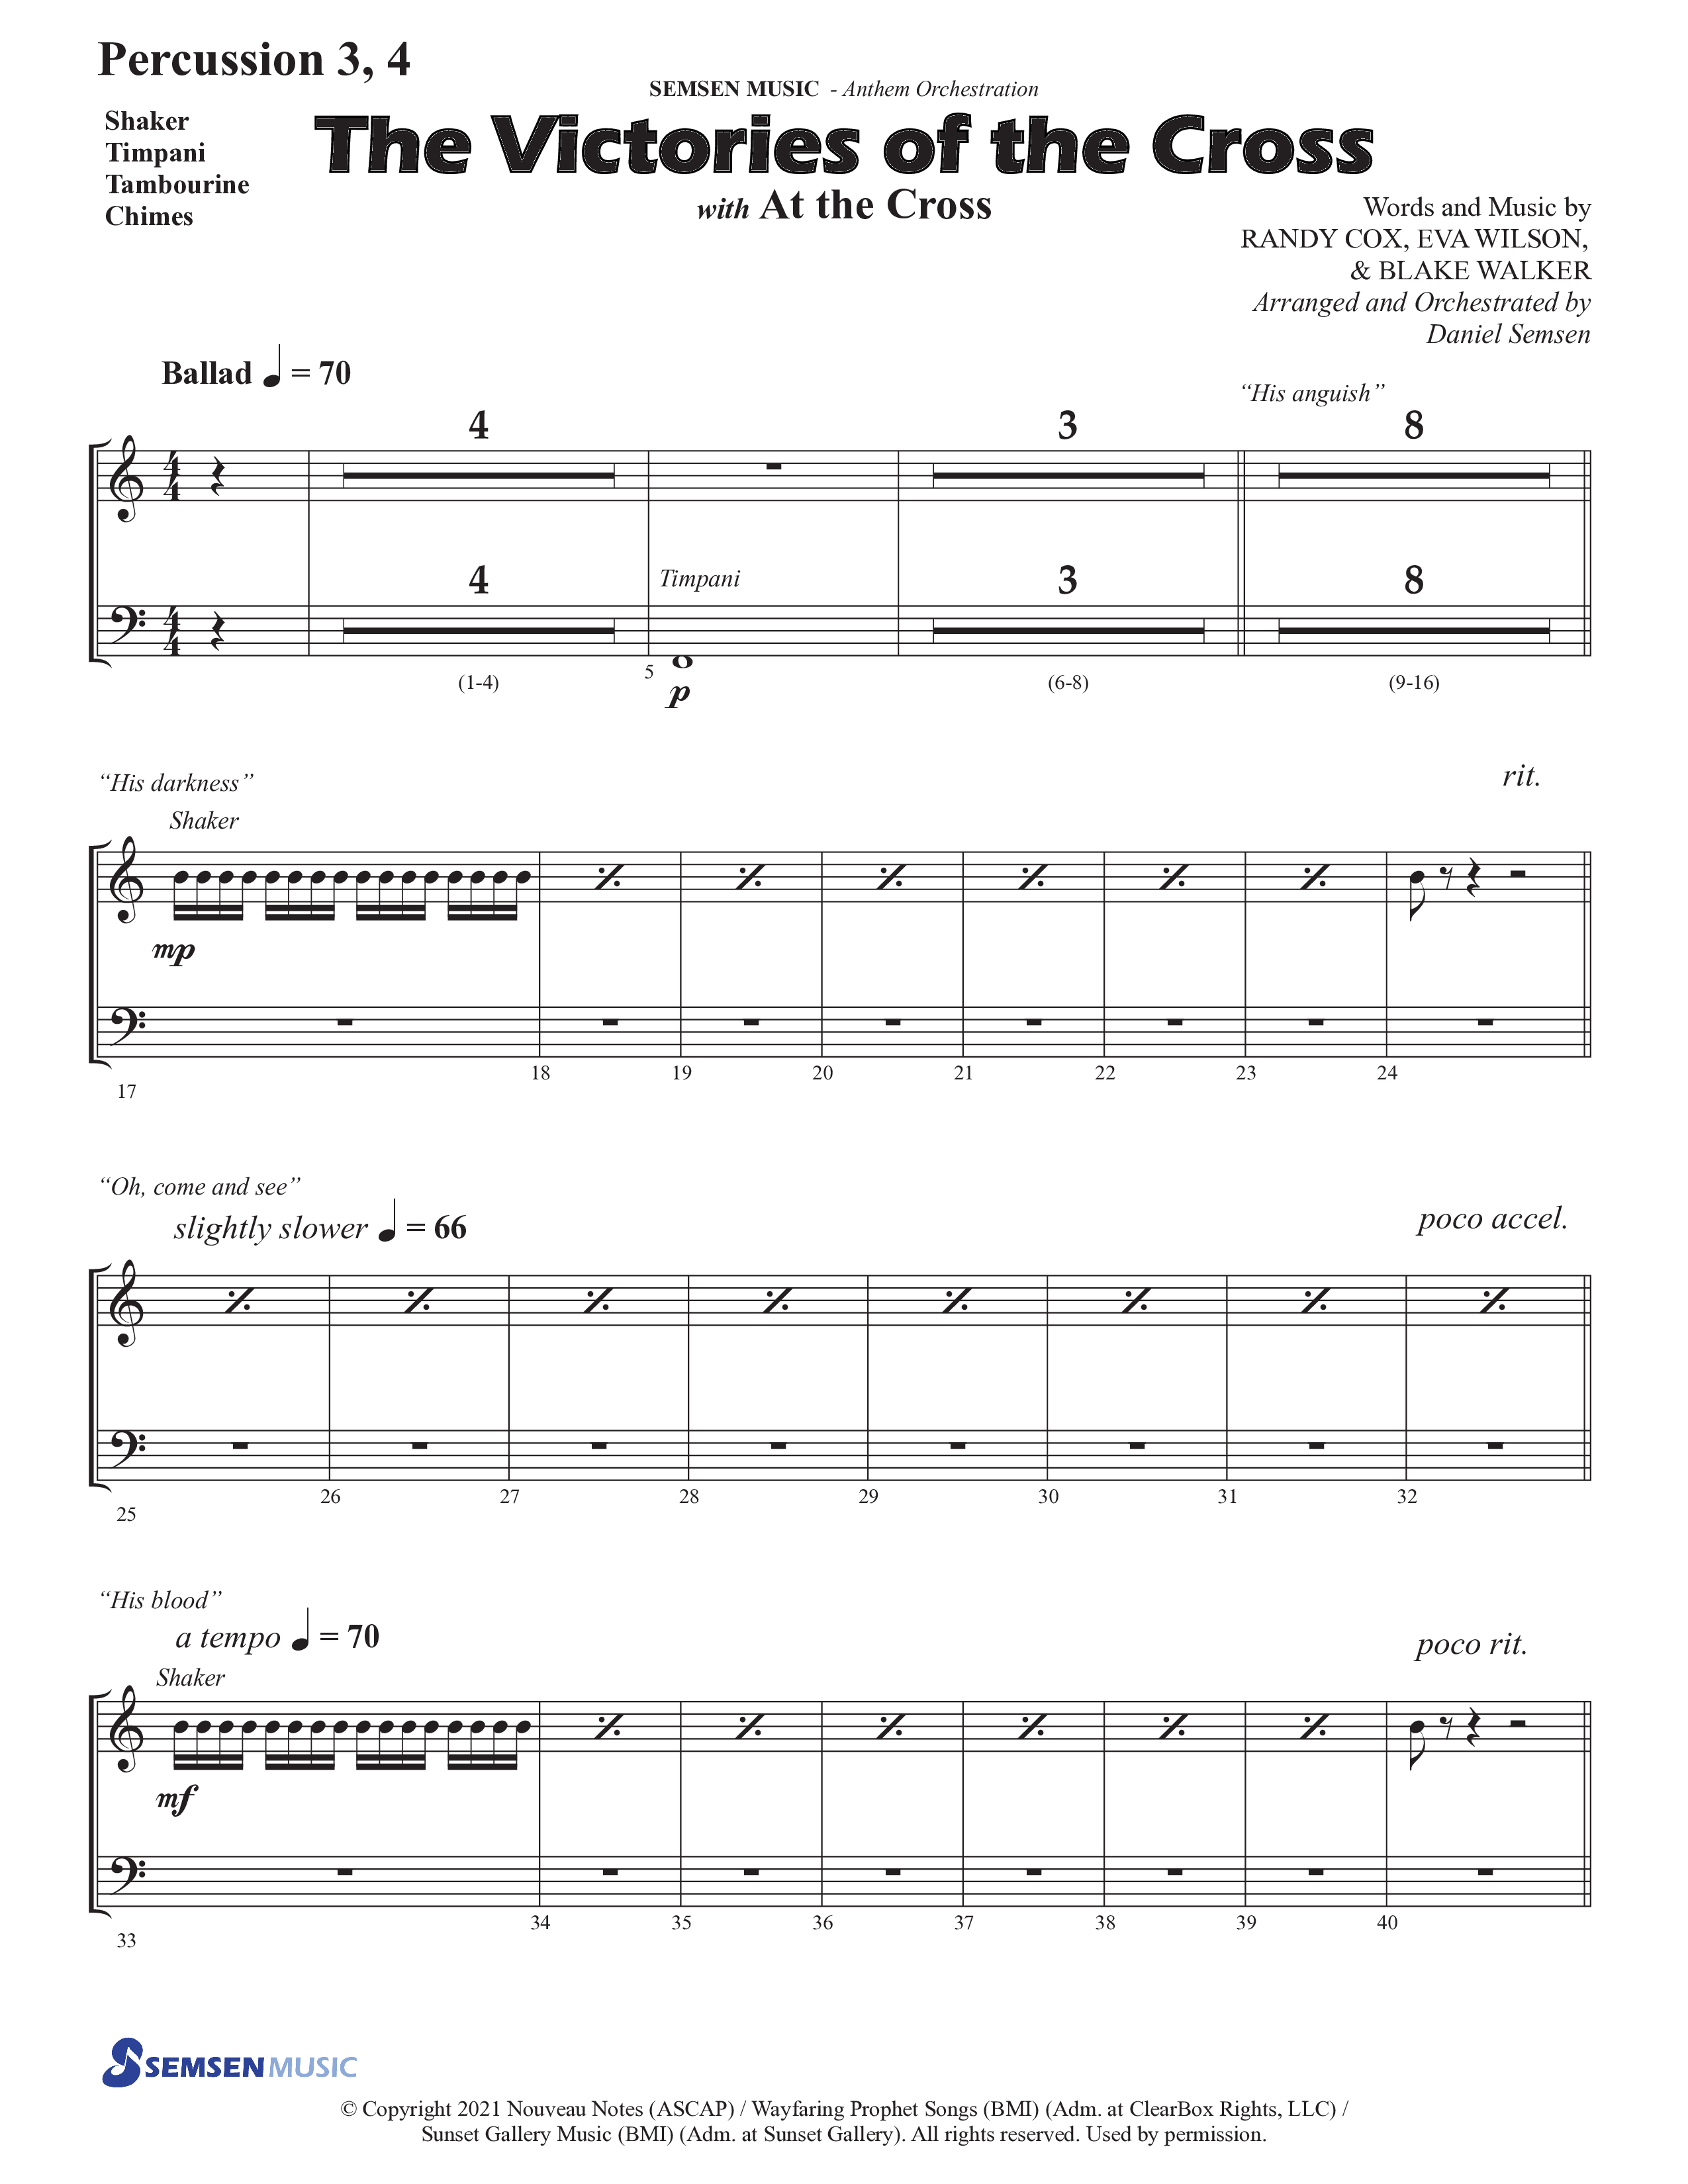 The Victories Of The Cross (with At The Cross) (Choral Anthem SATB) Percussion (Semsen Music / Arr. Daniel Semsen)